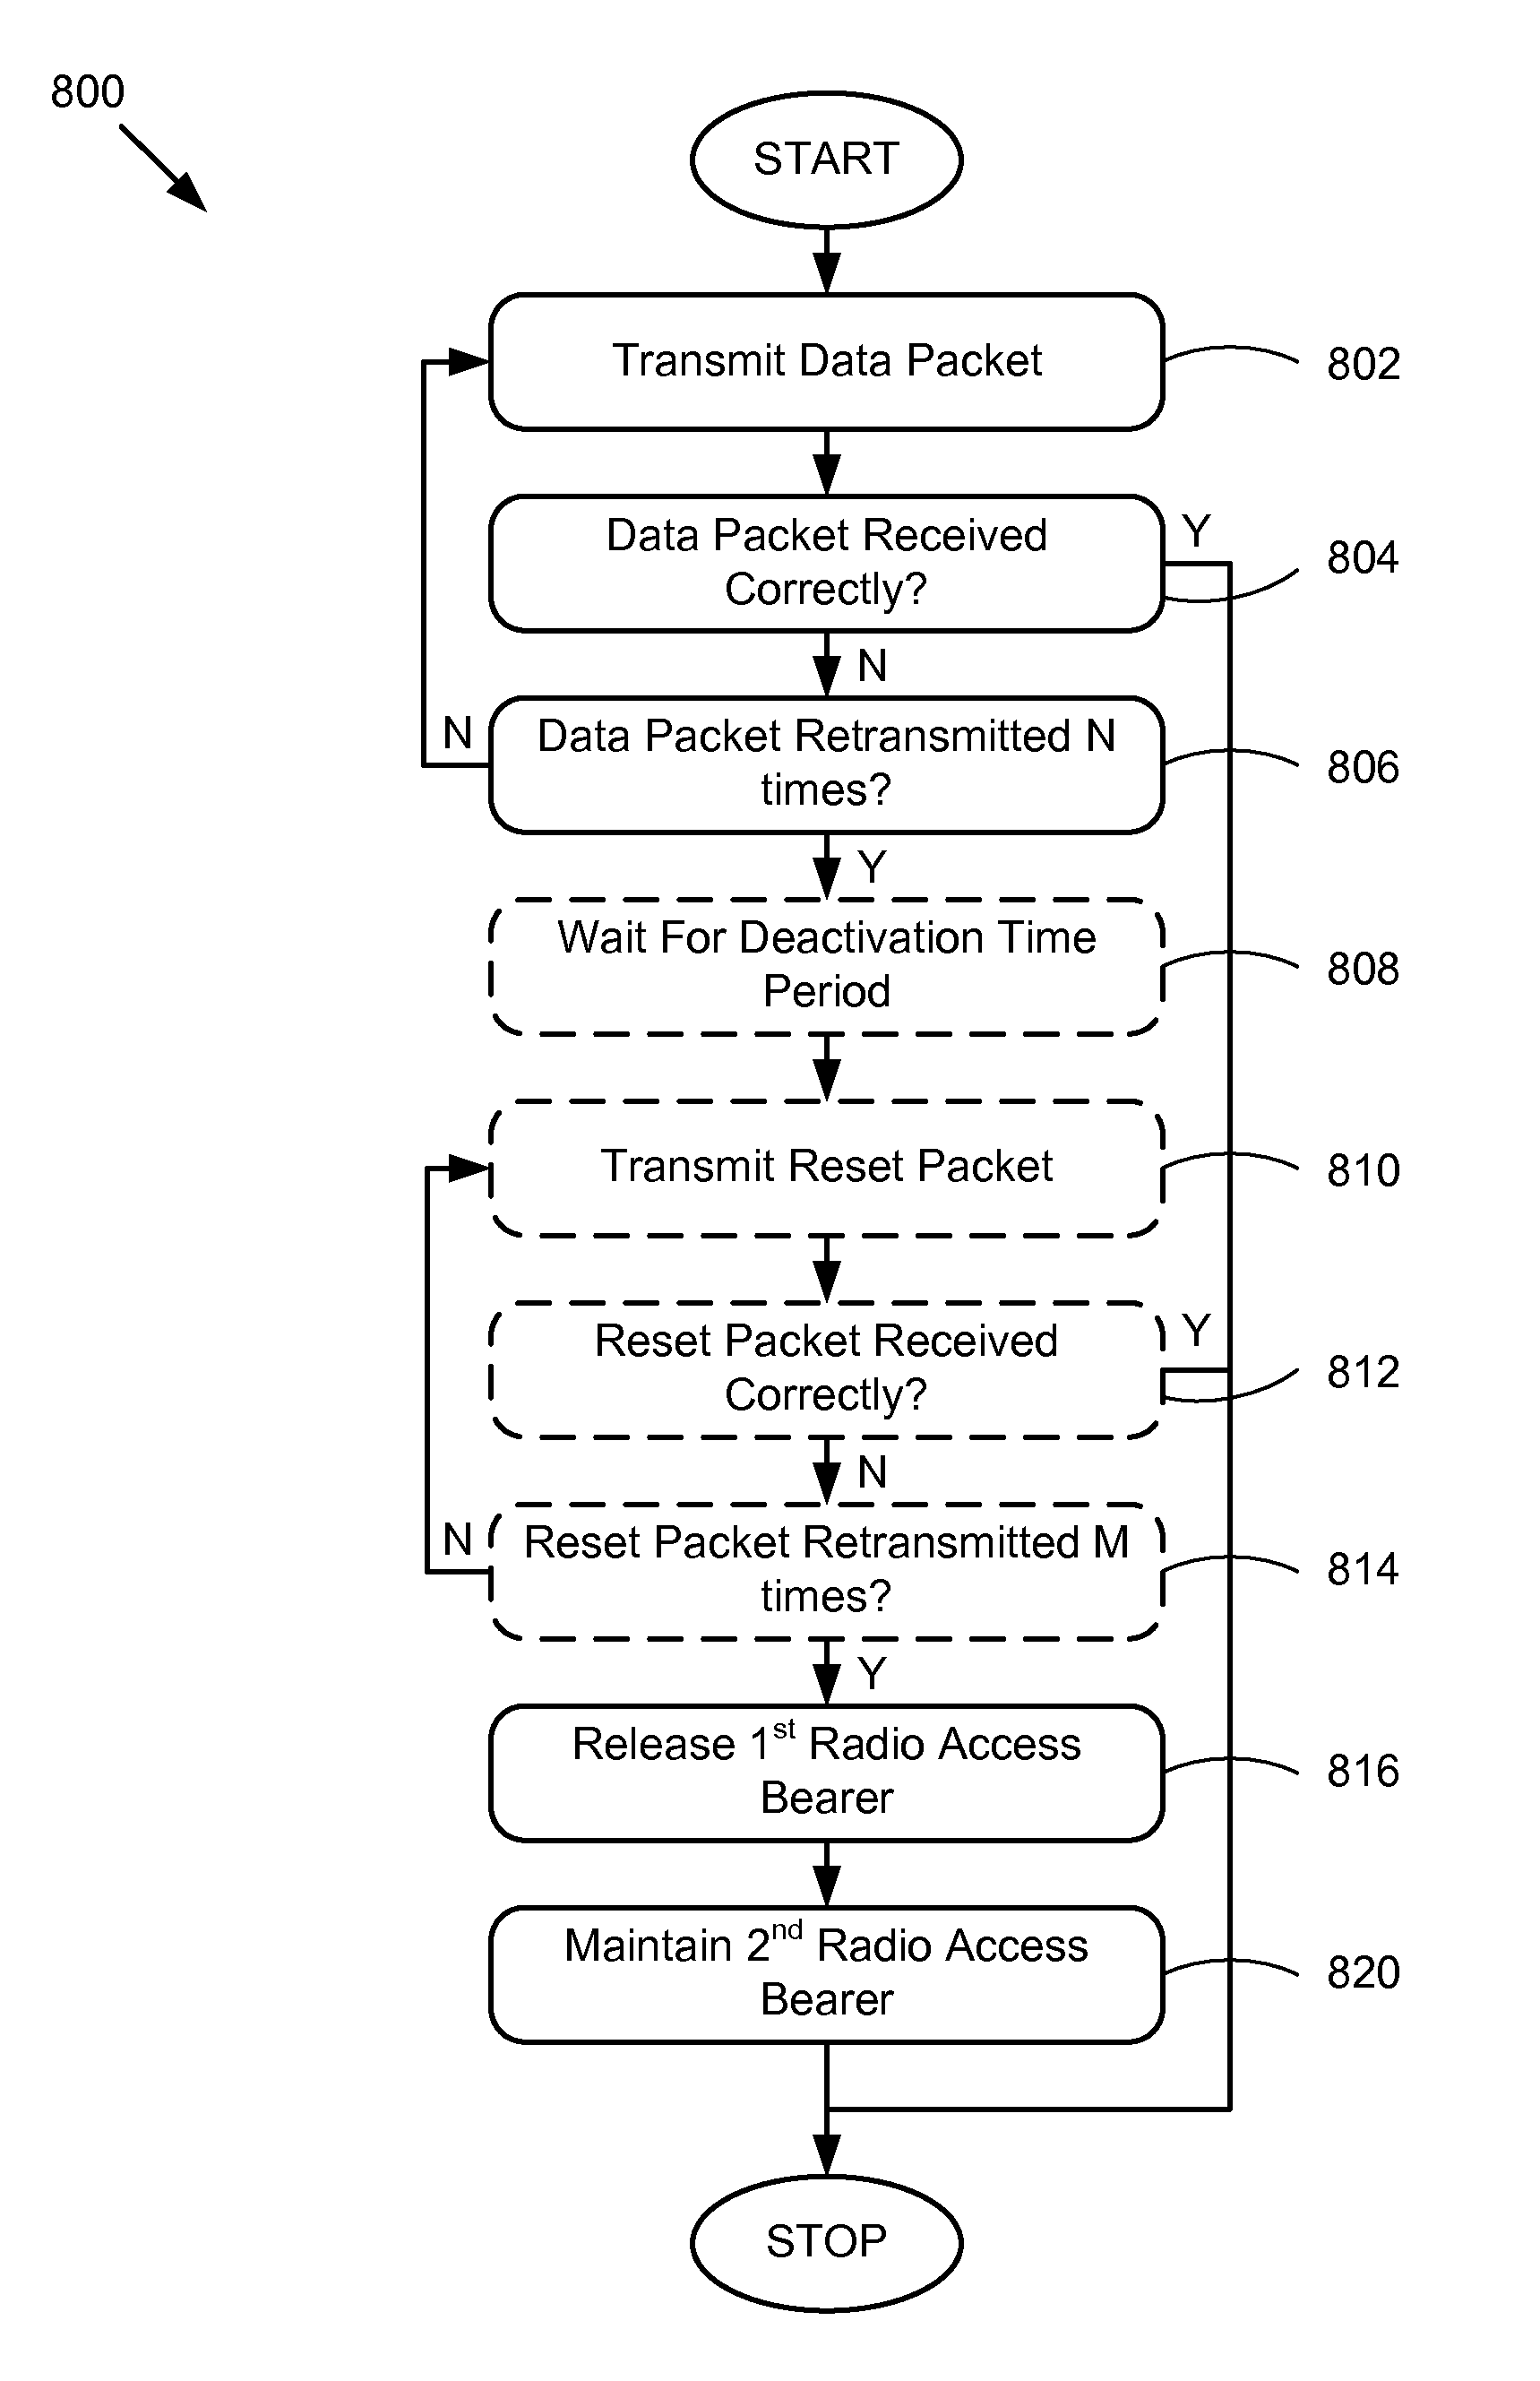 Method to control multiple radio access bearers in a wireless device